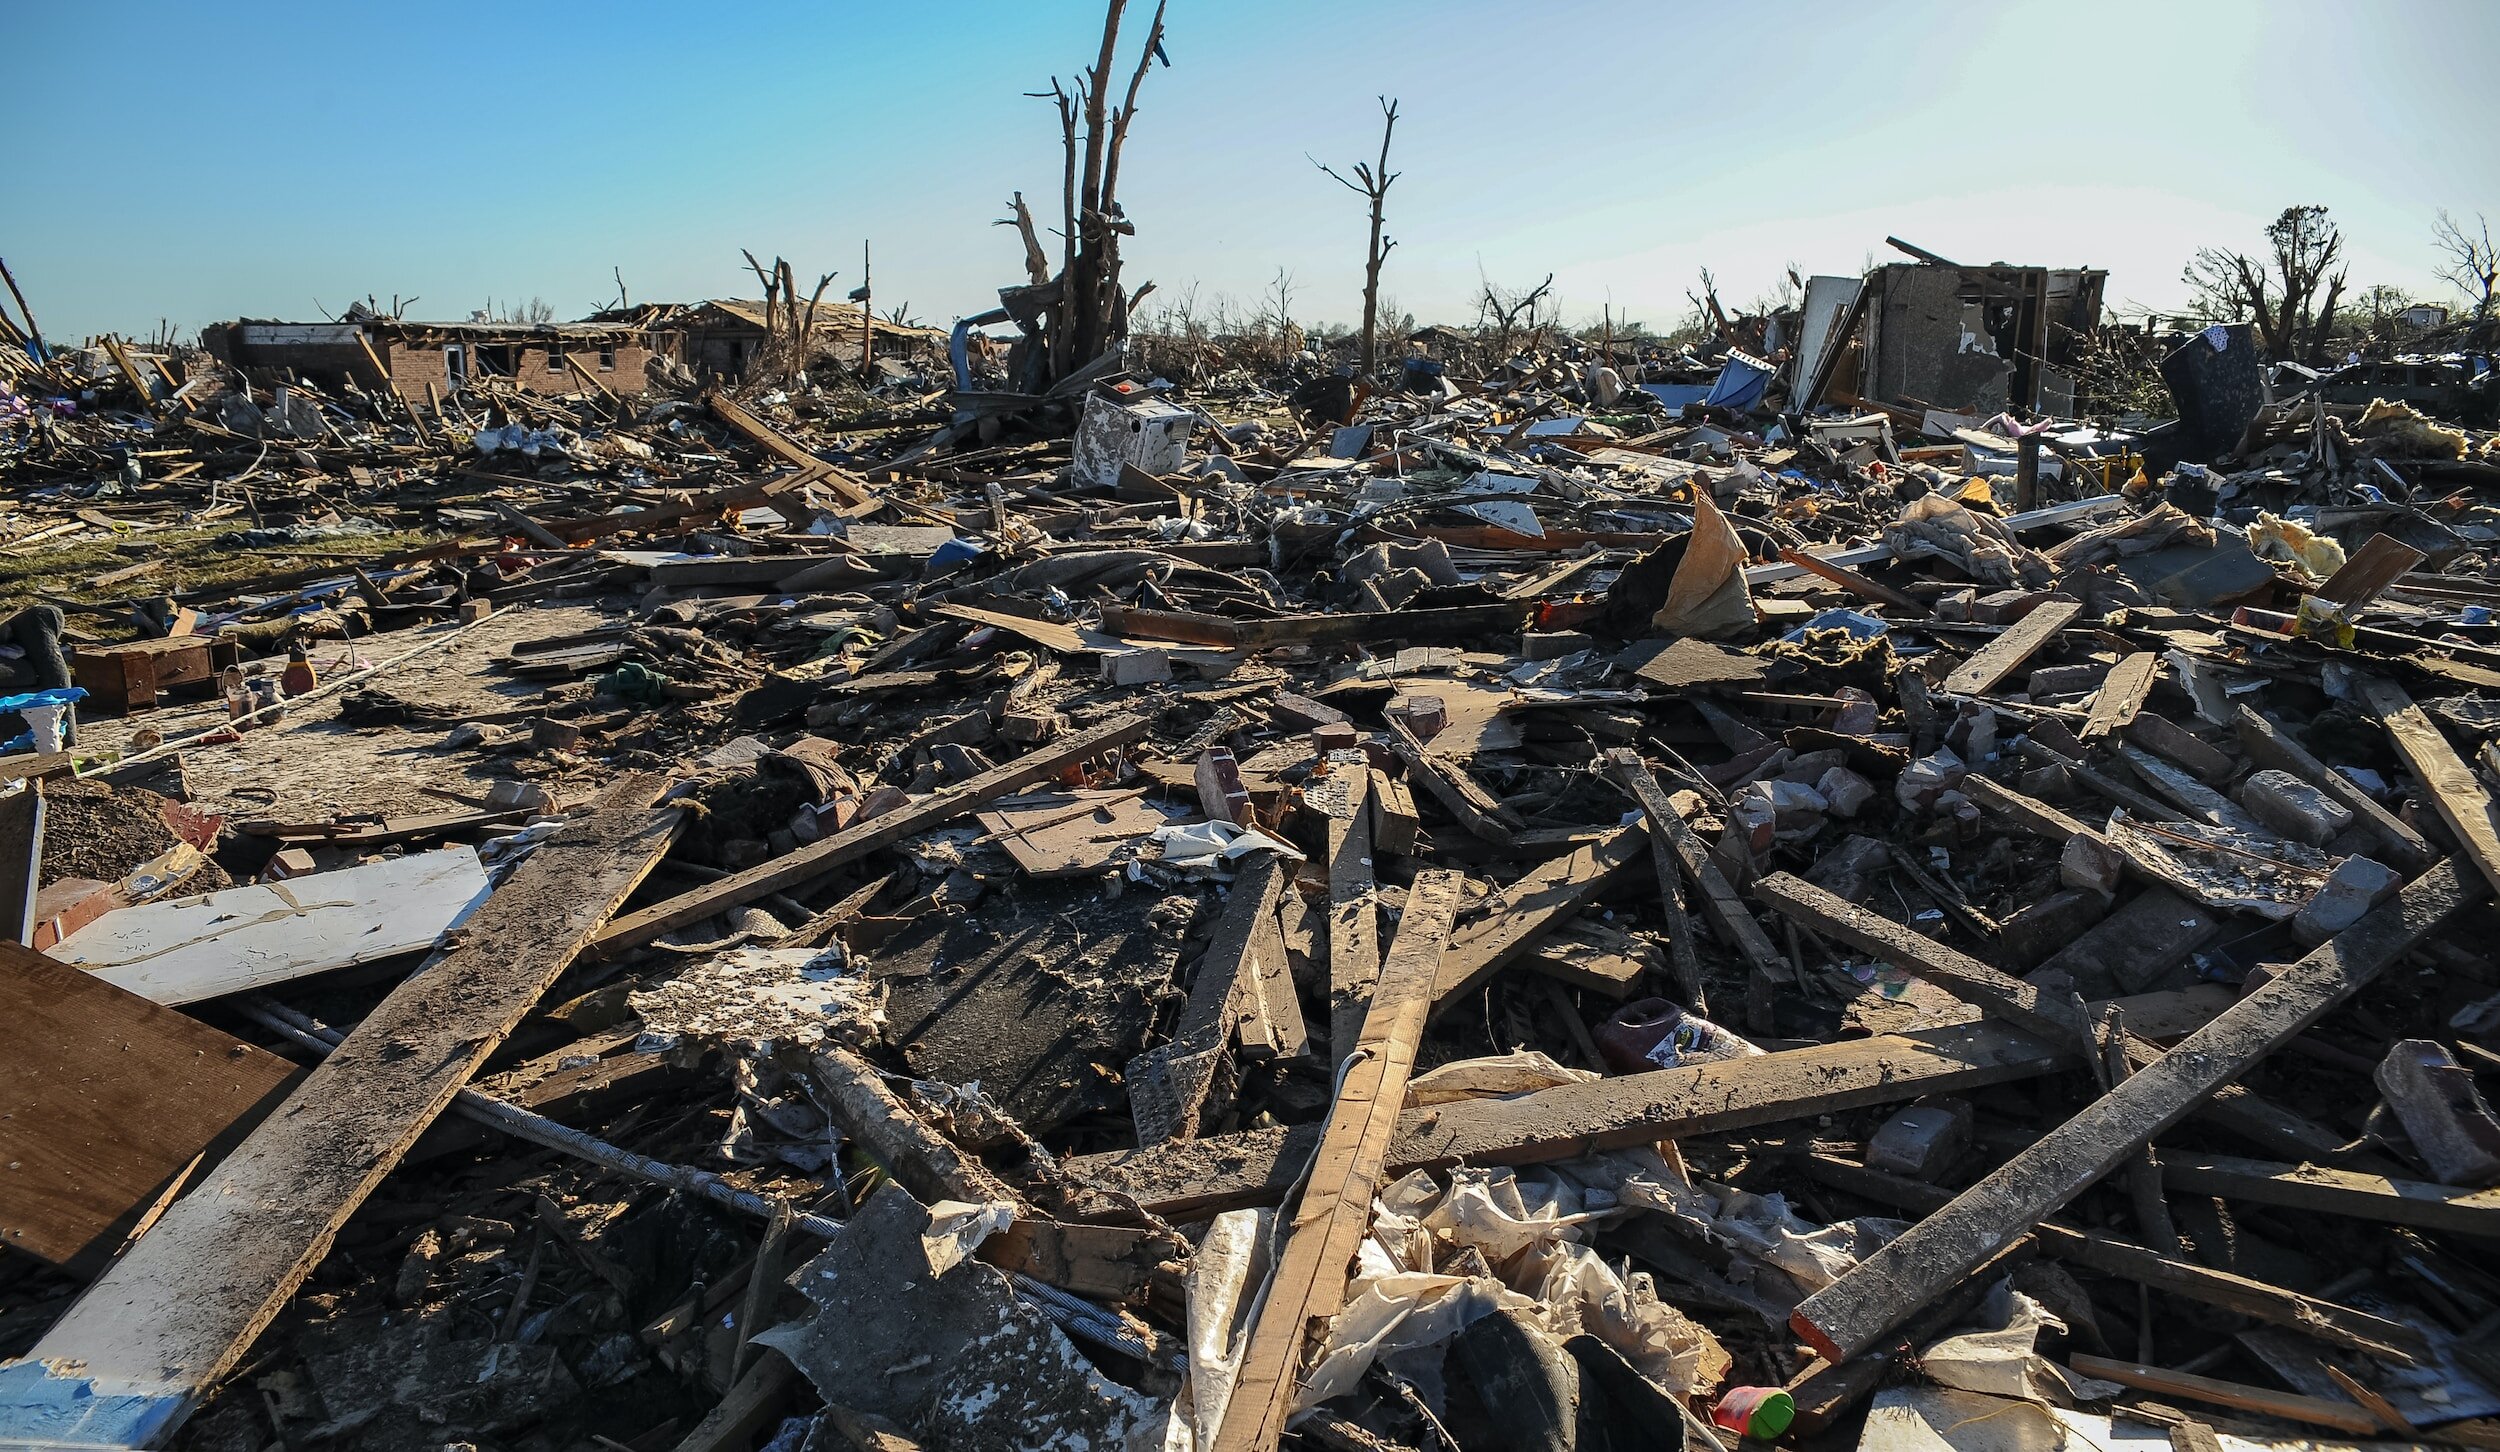 Equity in Emergency Management: How Behavioral Science Can Help Support Preparedness and Disaster Response